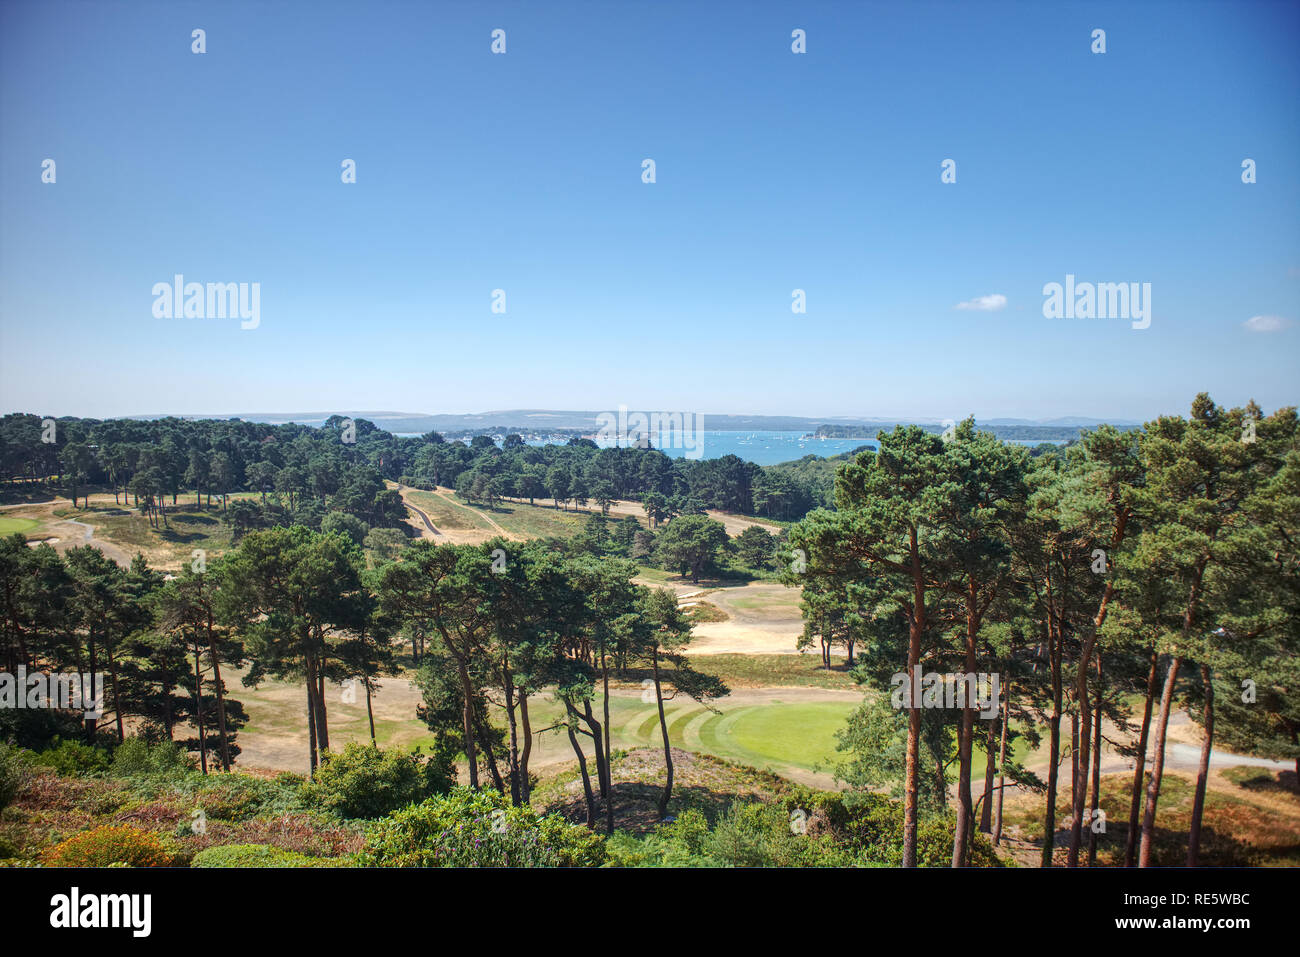 A panoramic view of Sandbanks, the Purbeck Hills, Brownsea Island and a golf course from Poole on the Dorset Coast in England, UK in the summer. Stock Photo